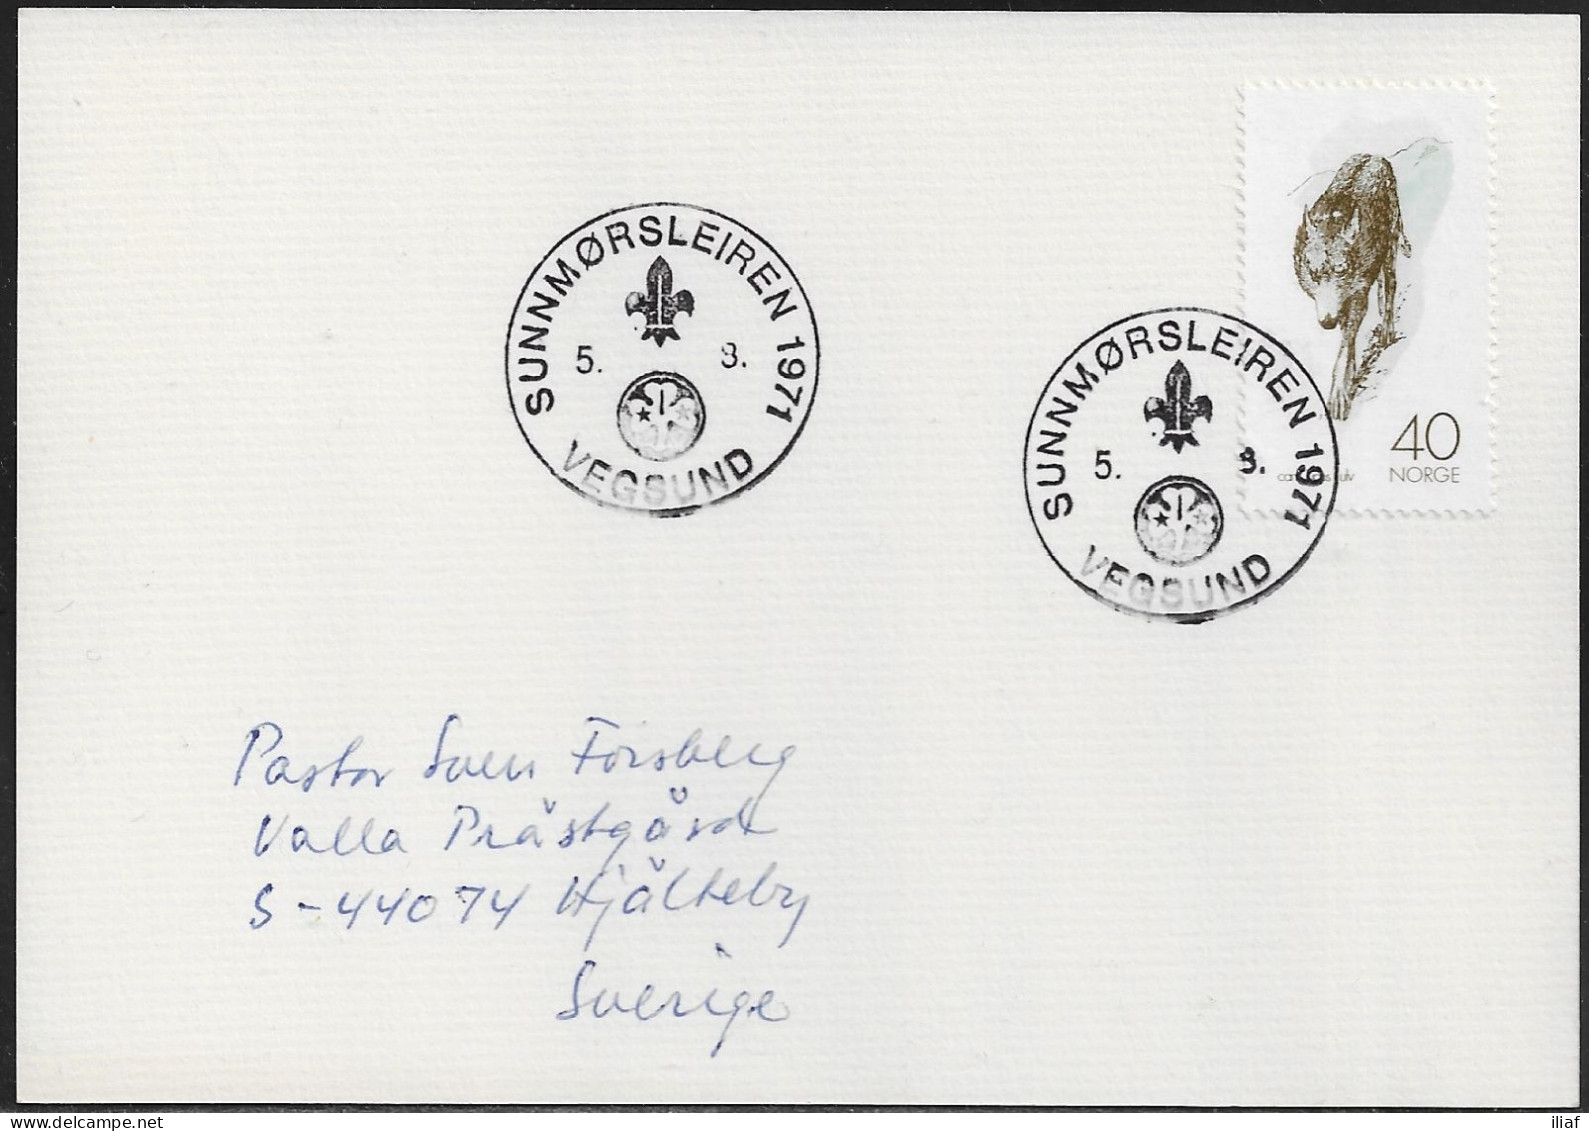 Norway.   A Scout Camp At Vegsund 1976 (Norwegian Boy Scout Association).   Norway Special Event Postmark. - Lettres & Documents